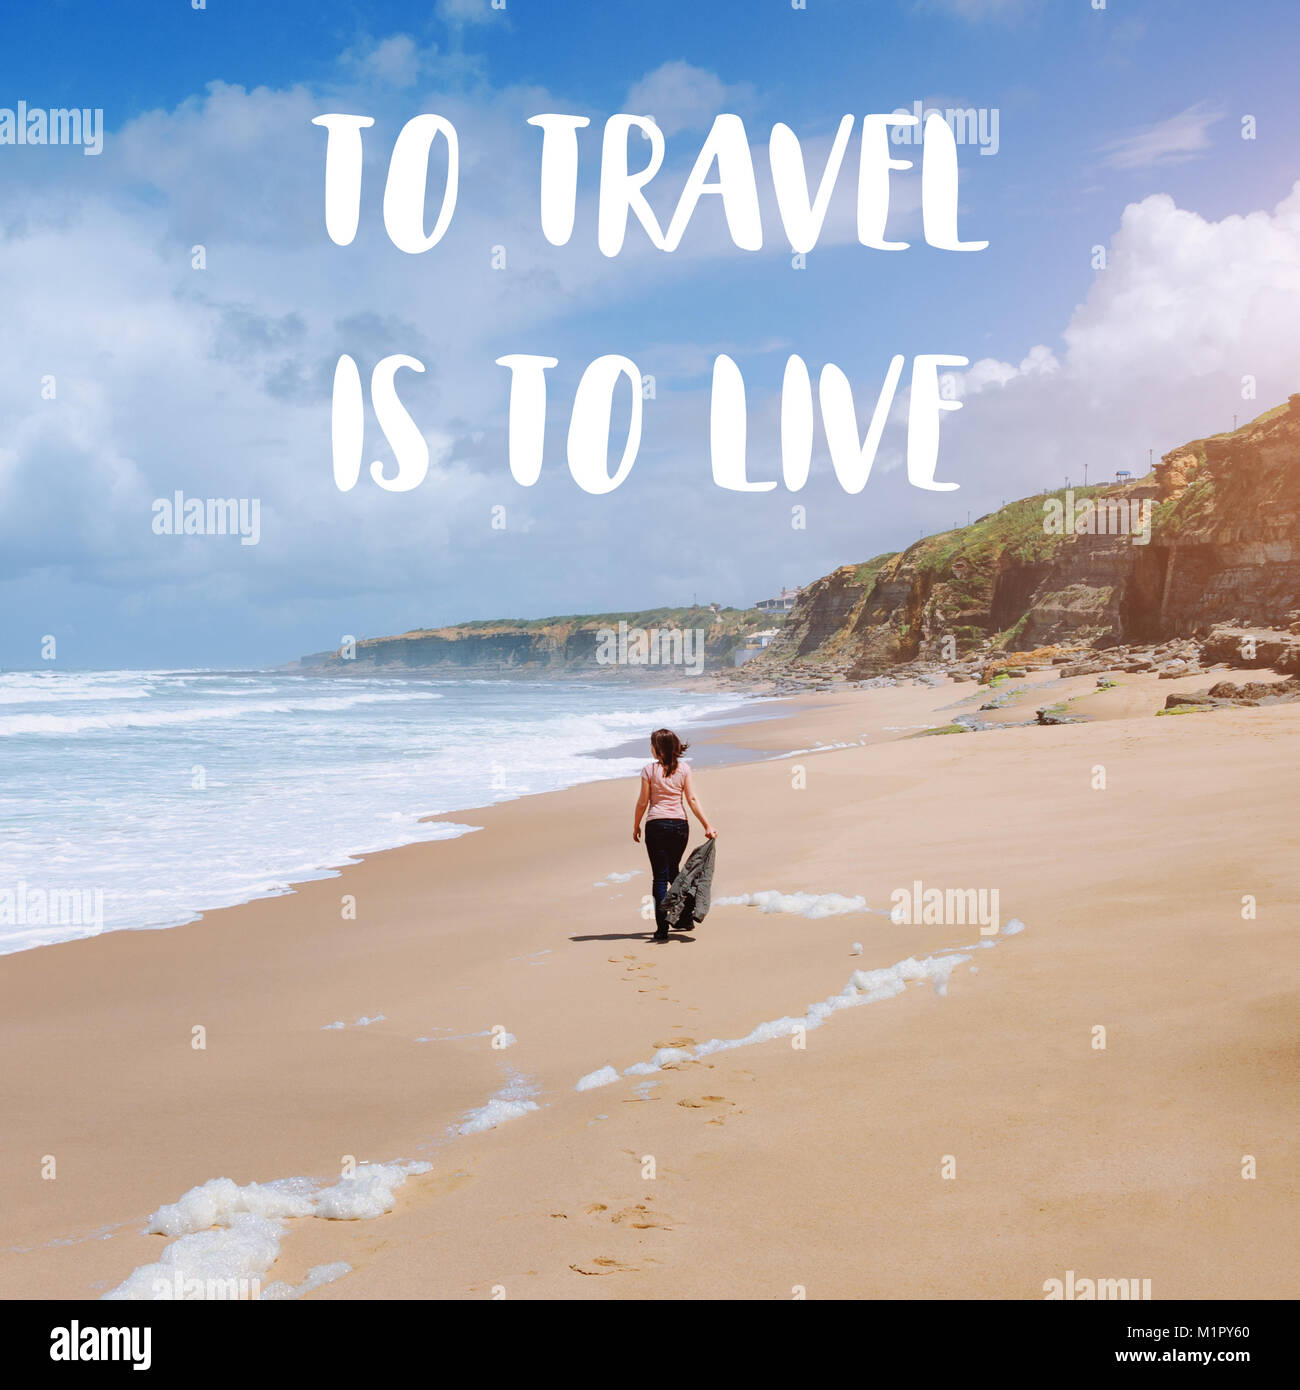 Travel quote, words To Travel Is To Live. Summer vacation happiness carefree joyful woman standing on sand enjoying tropical beach. Lonely traveler on Stock Photo